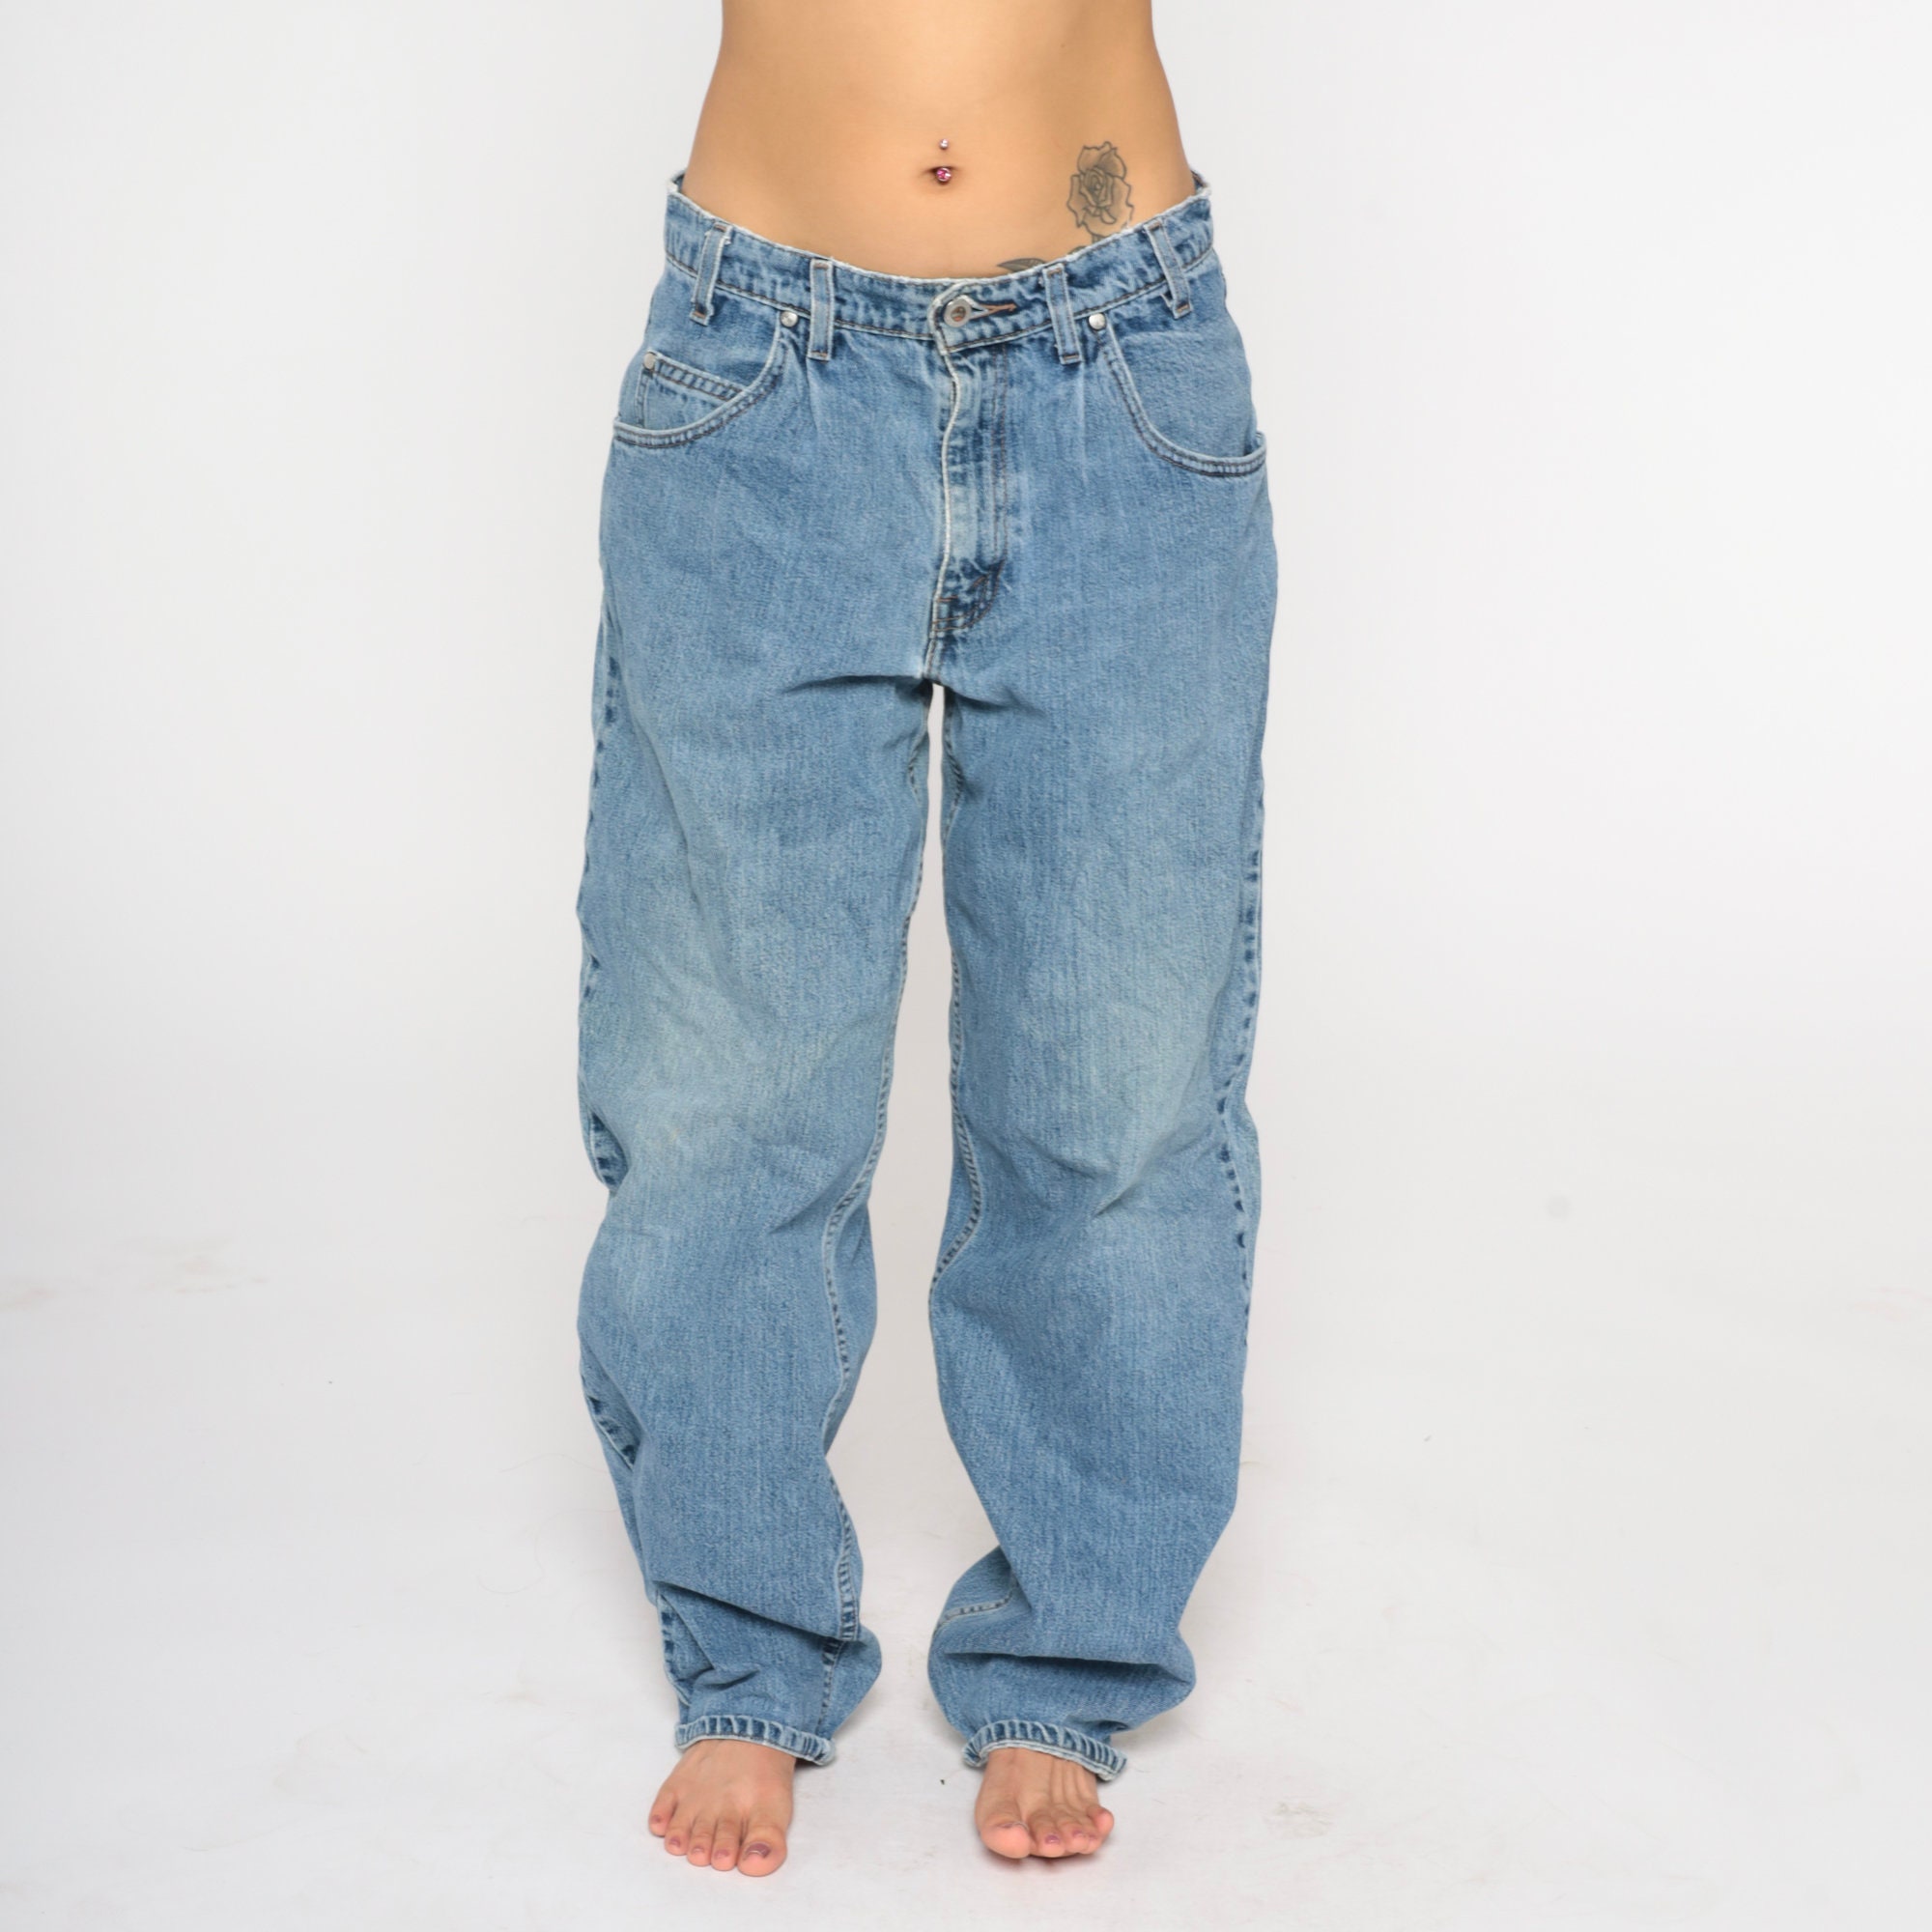 Levis Silvertab Jeans 90s High Waisted Jeans Straight Leg Levi Jeans ...